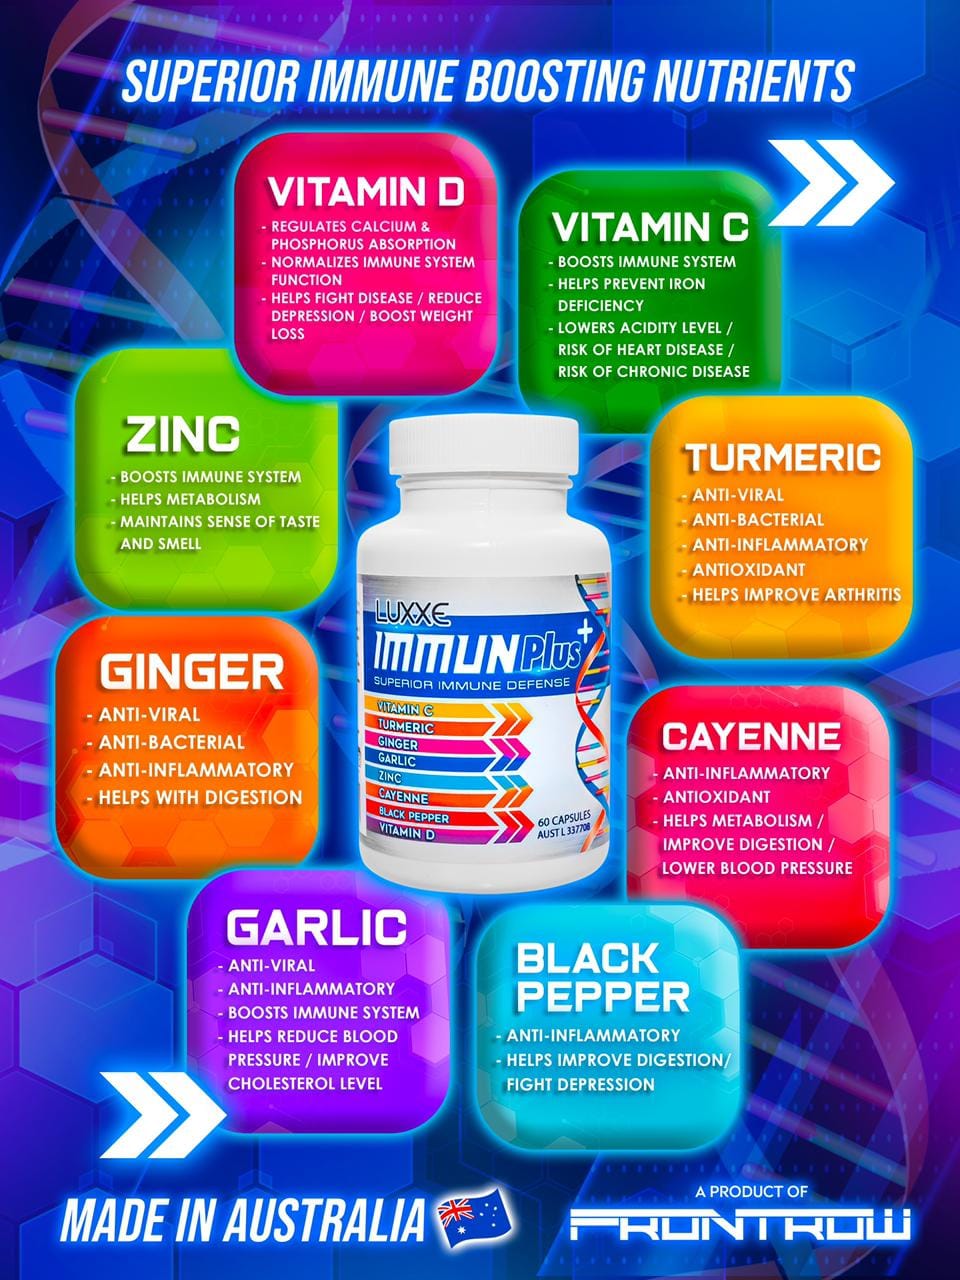 Make Powerful Immune-Boosting Nutrients like Vitamins C & D, Turmeric, Cayenne, Black Pepper, Garlic, Ginger, and Zinc a part of your daily routine with the NEW All-In-One Luxxe Immun Plus from Australia—your Superior Immune Defense supplement, exclusively available in FRONTROW!